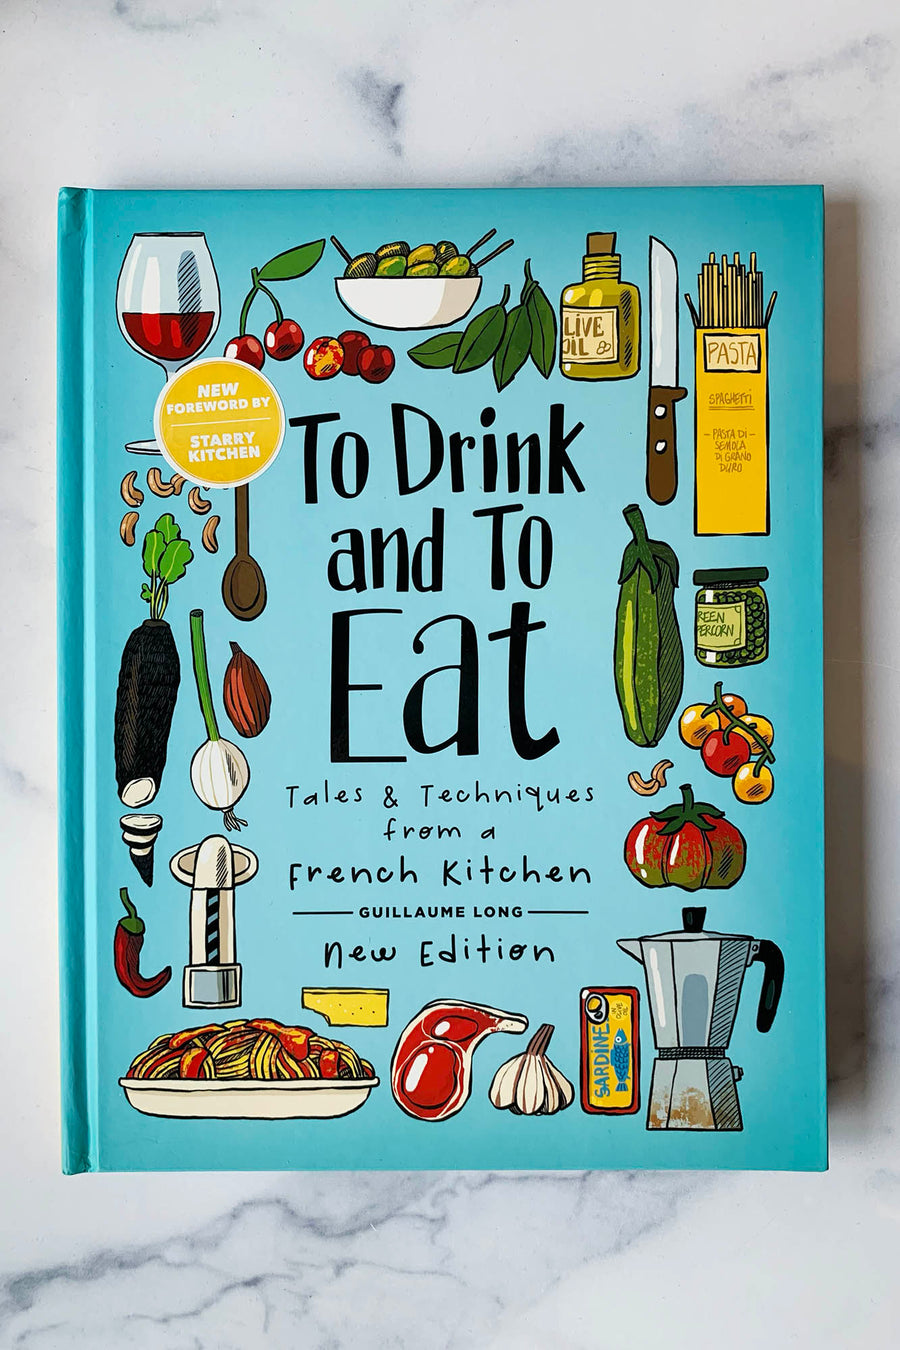 To Drink and To Eat: Tales & Techniques